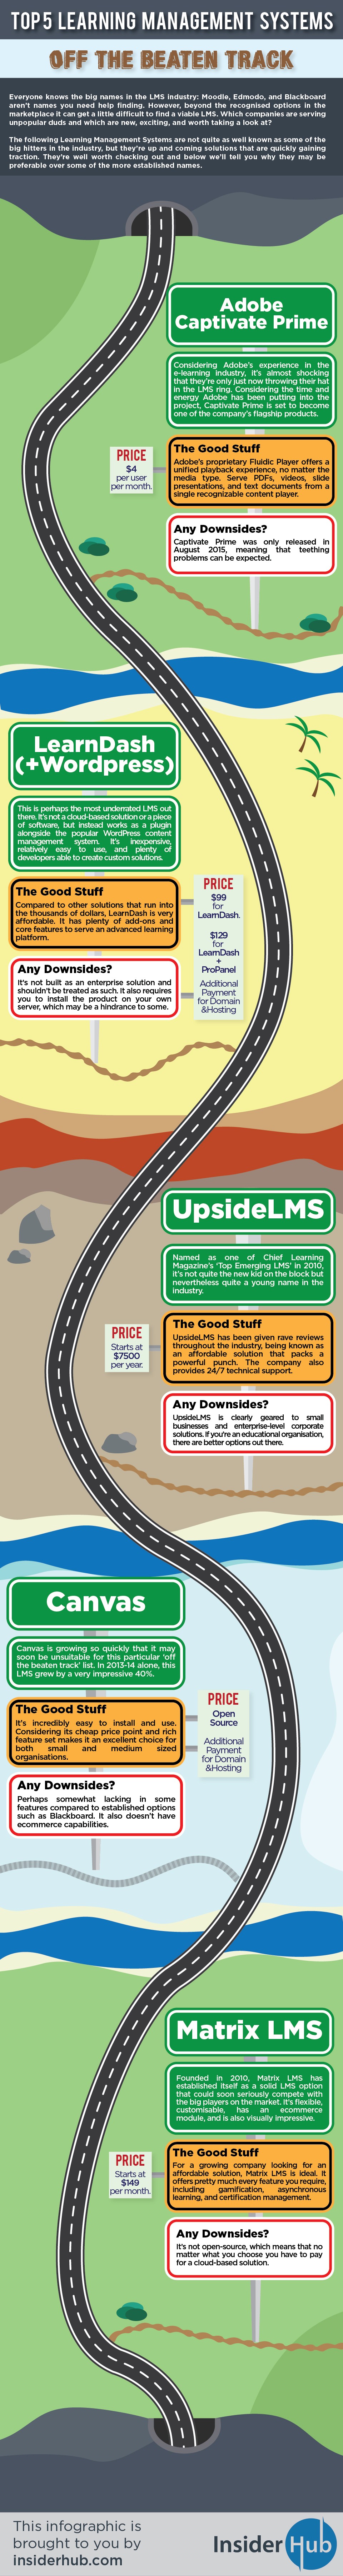 Top 5 LMS Off Beaten Track Infographic